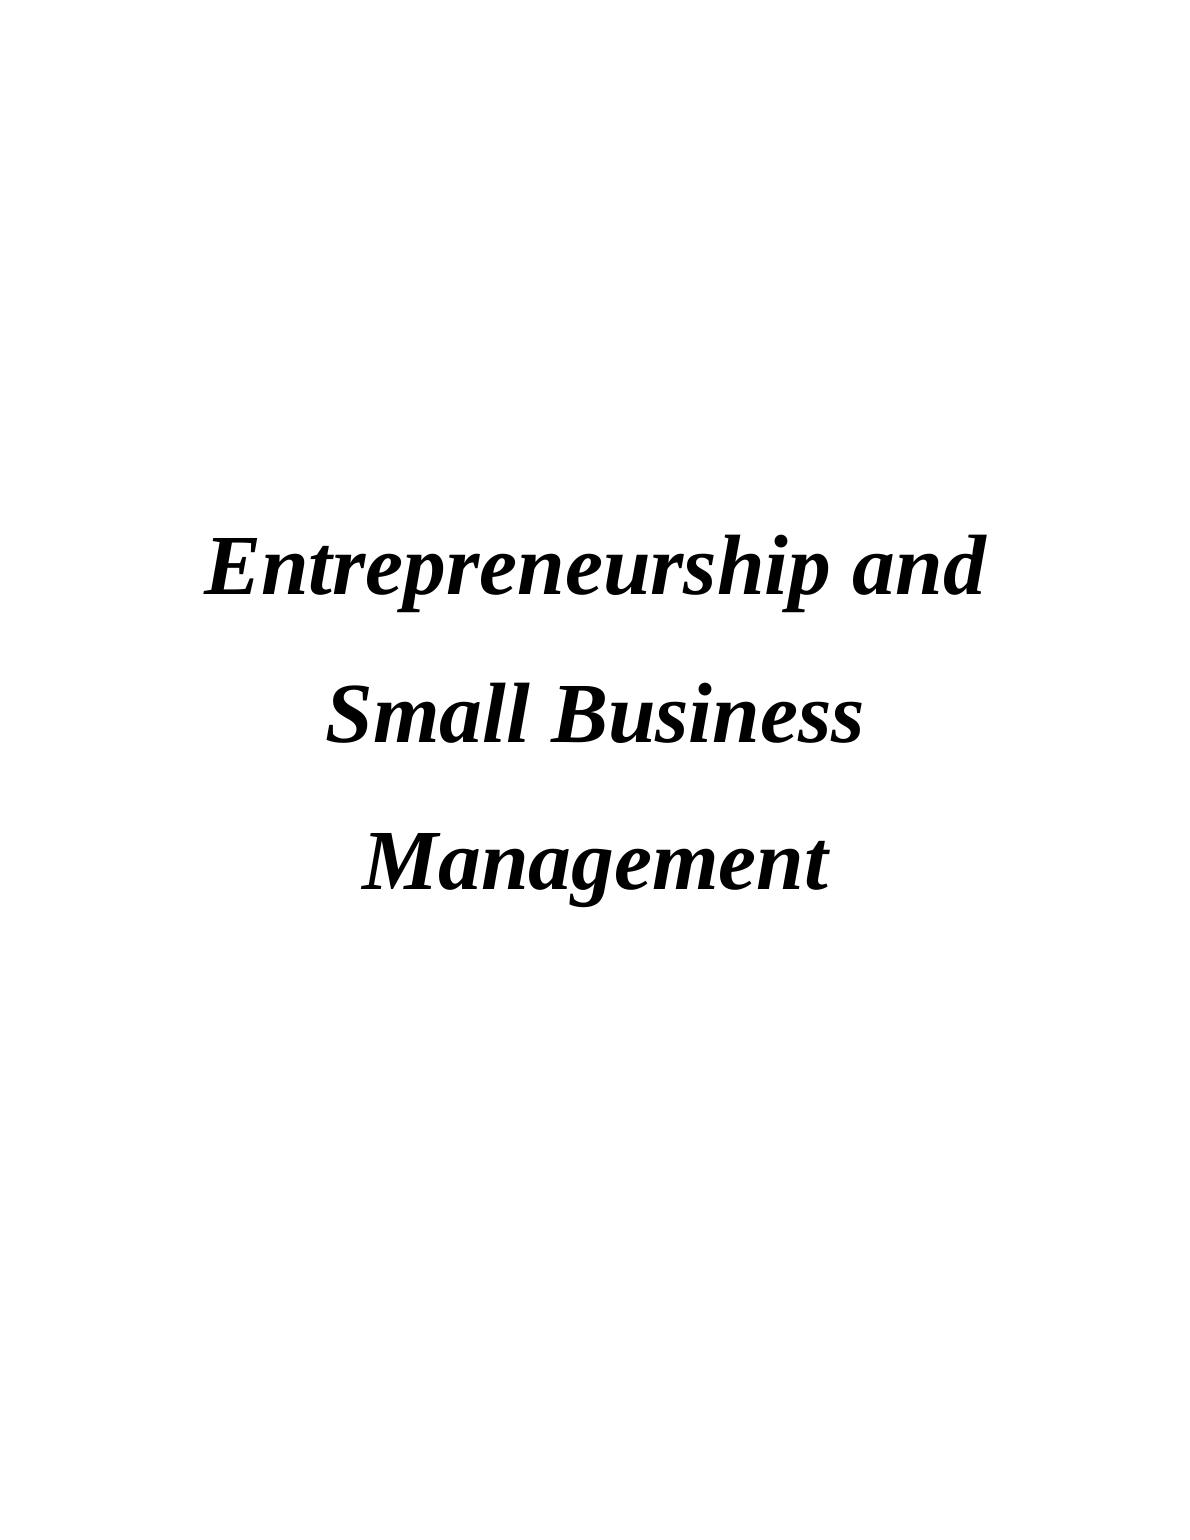 Entrepreneurship and Small Business Management | Report_1